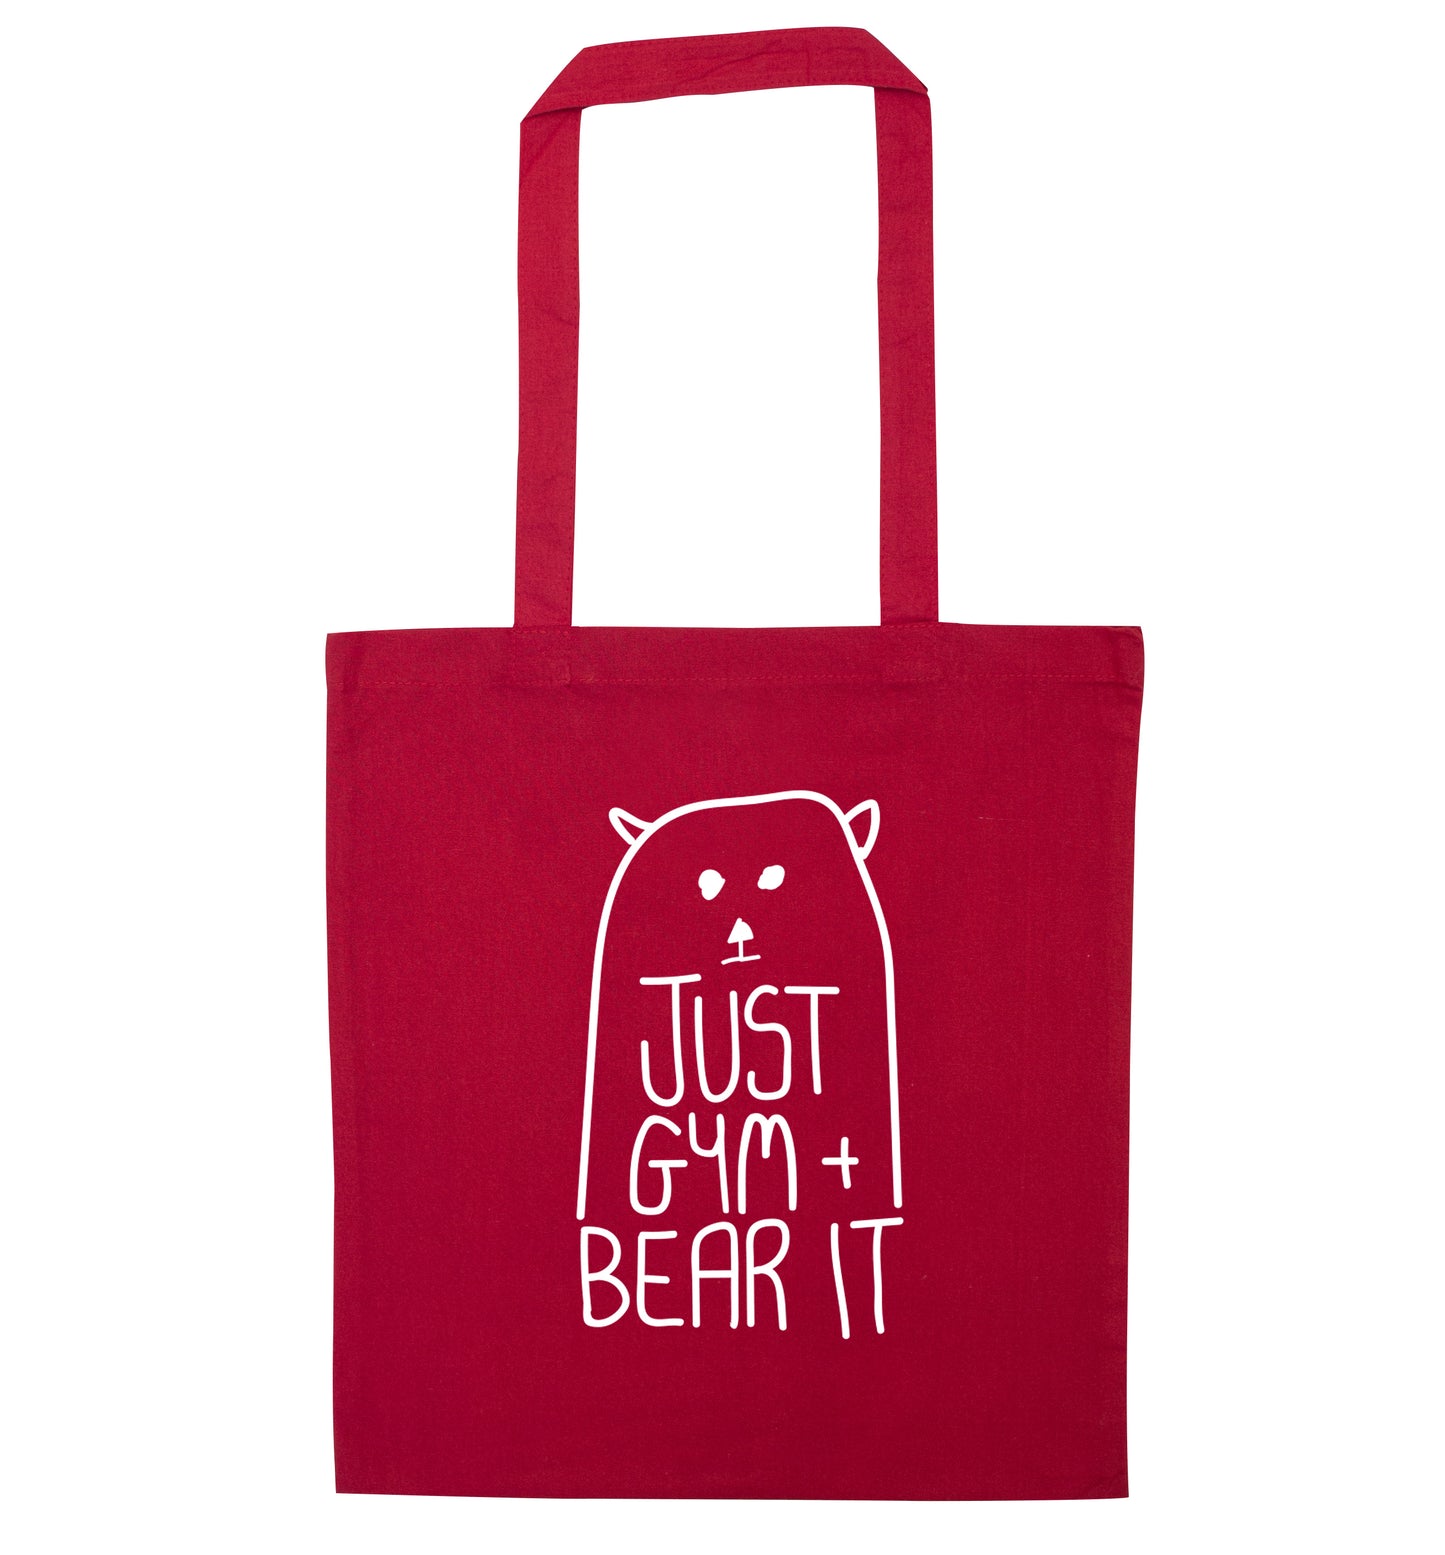 Just gym and bear it red tote bag